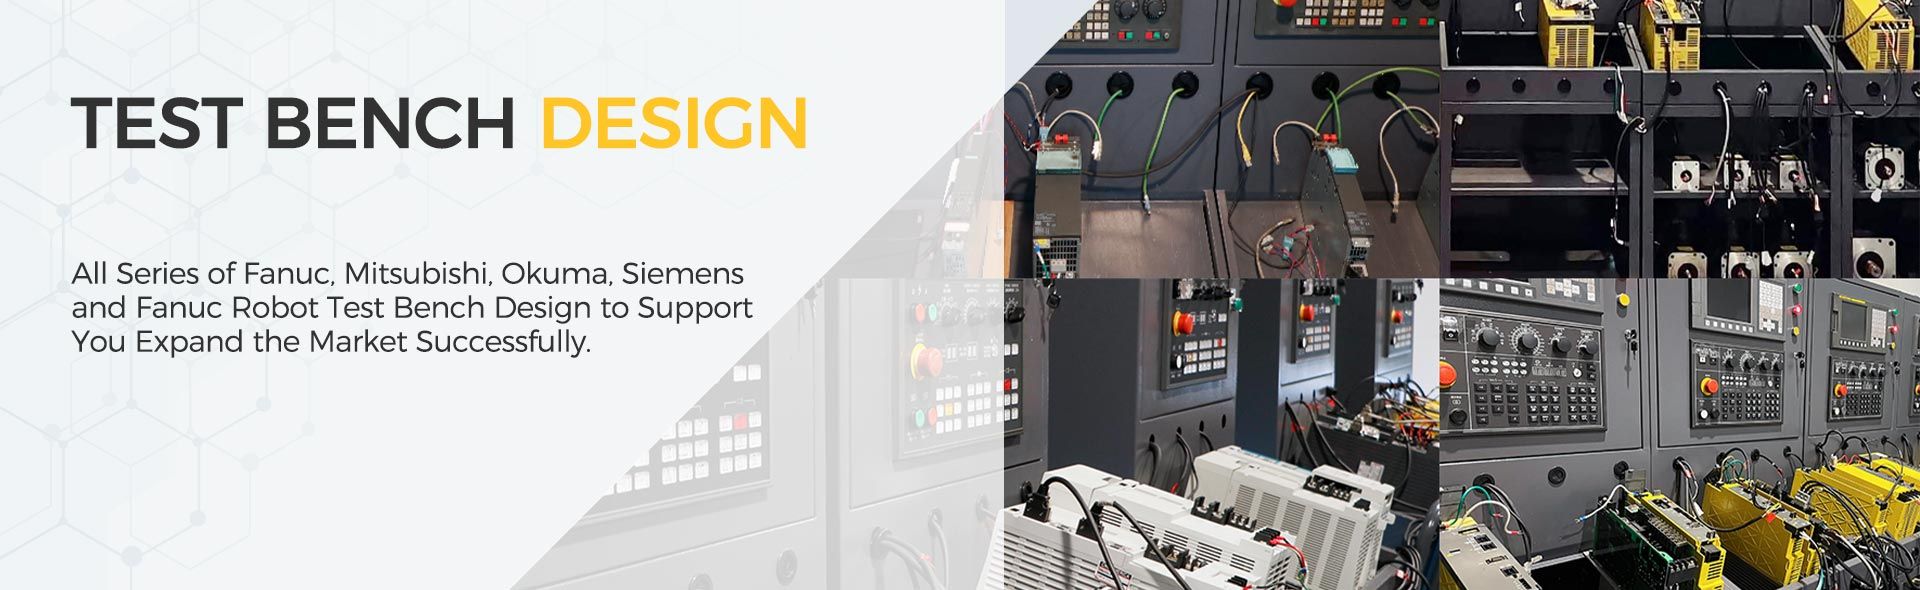 Songwei CNC provides All Series of Fanuc, Mitsubishi, Okuma, Siemens and Fanuc Robot Test Bench Design and build to Support You Expand the Market Successfully.